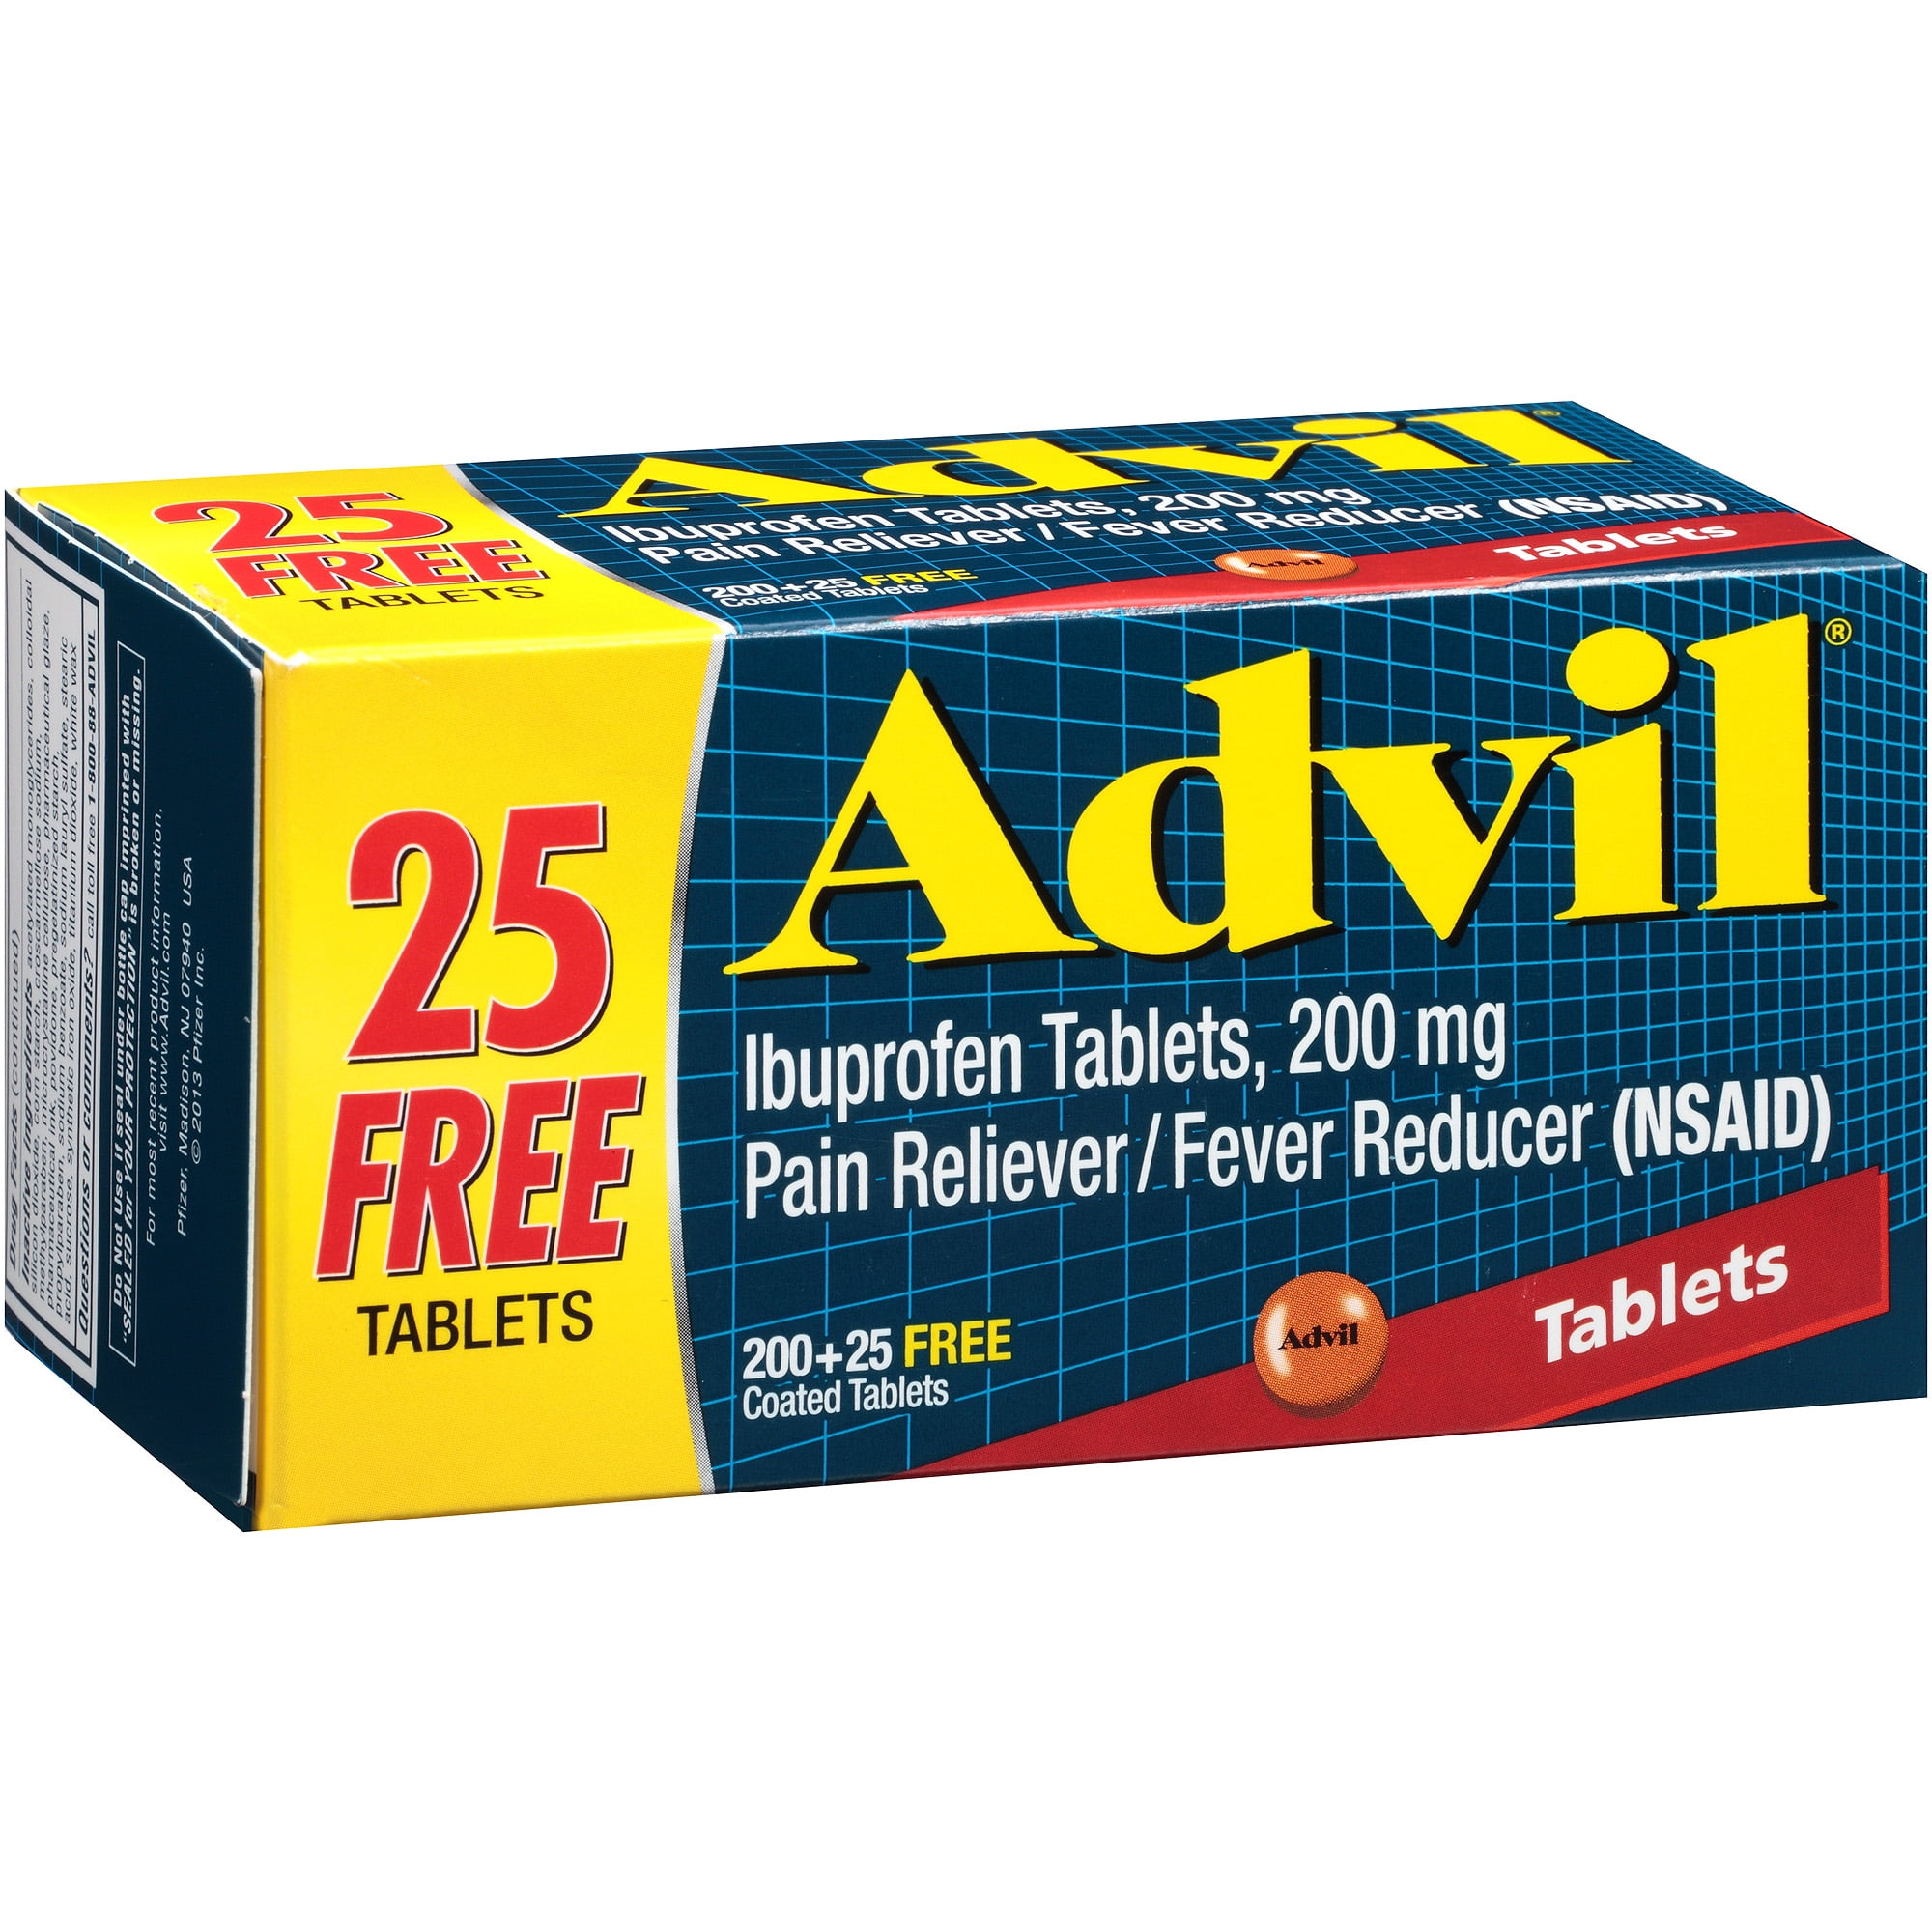 Advil - Was This Painkiller Discovered by Accident?